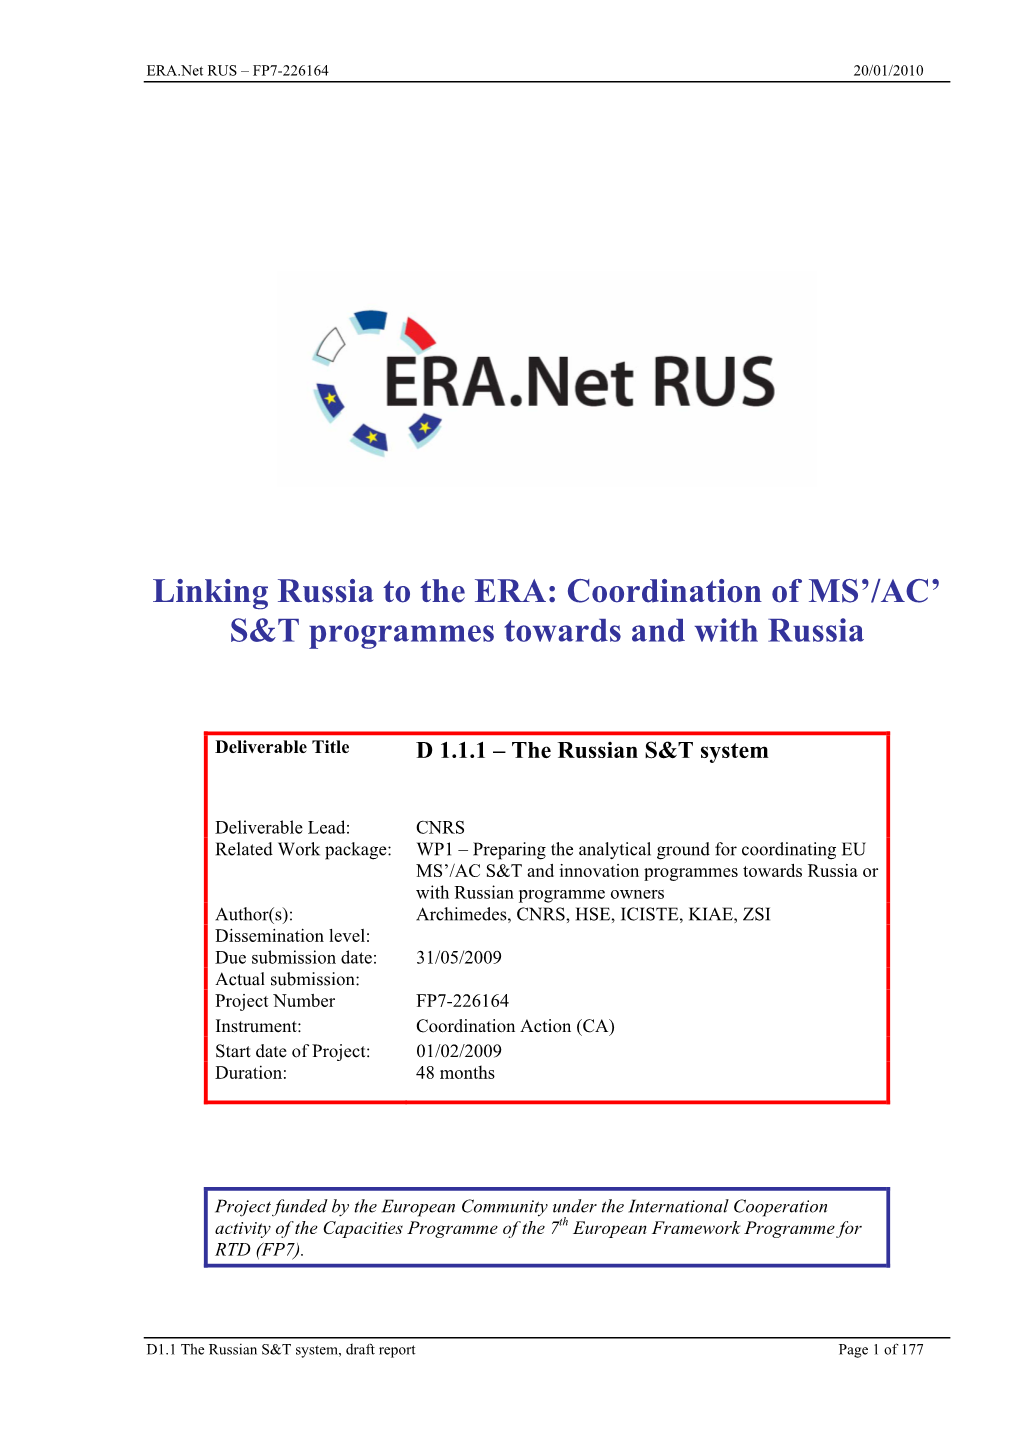 Linking Russia to the ERA: Coordination of MS’/AC’ S&T Programmes Towards and with Russia